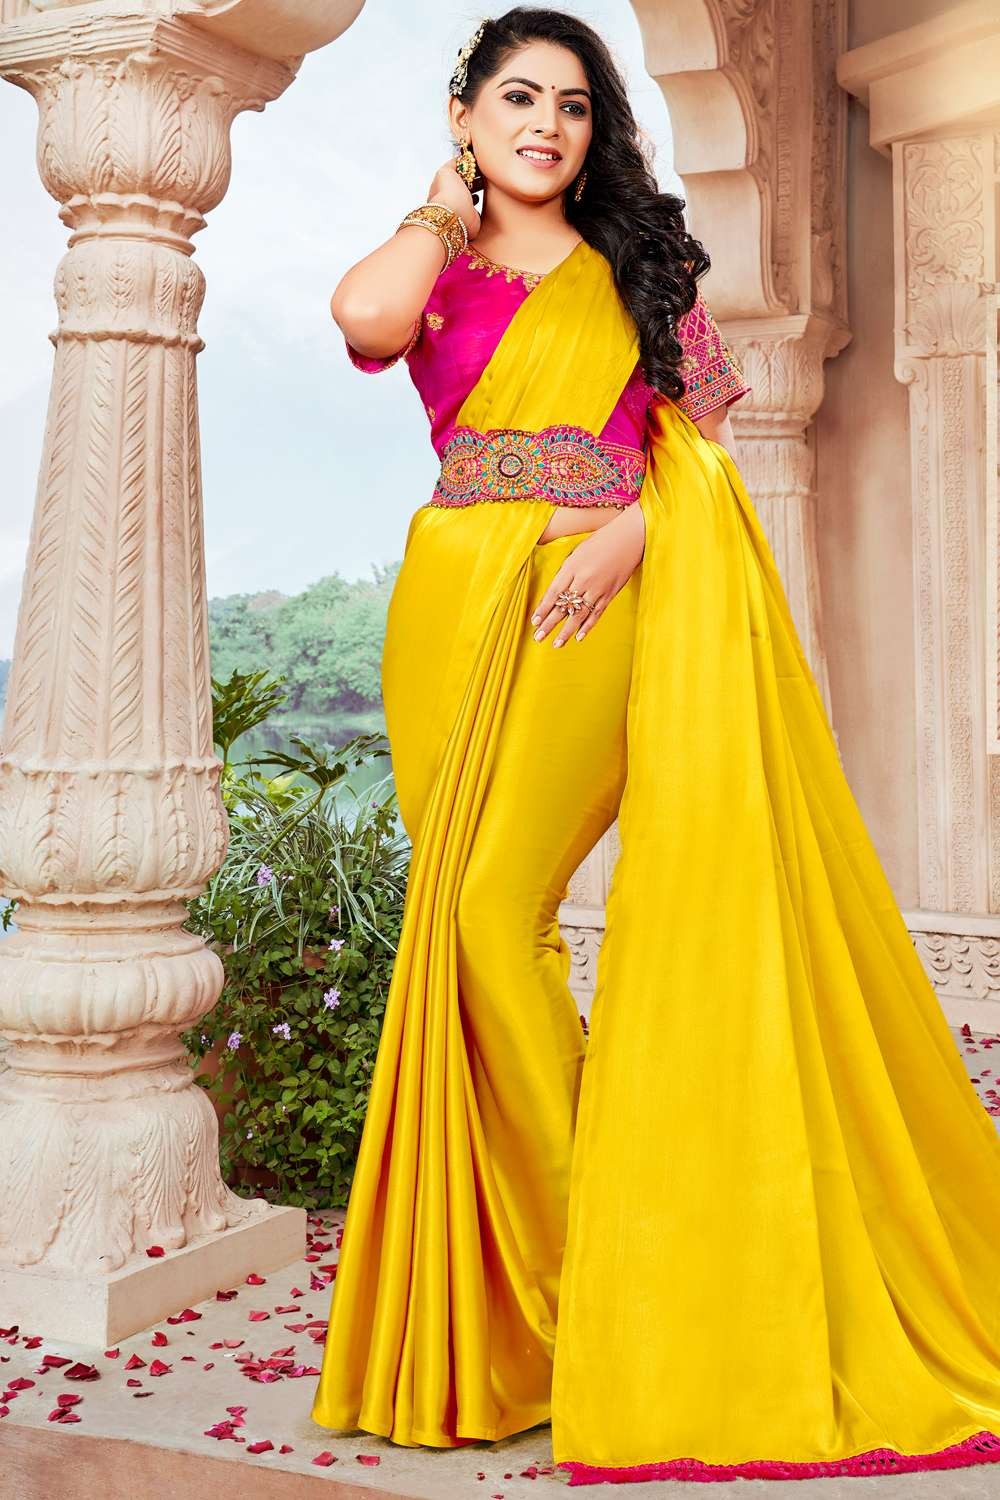 New Yellow And Pink Saree Blouse Designs